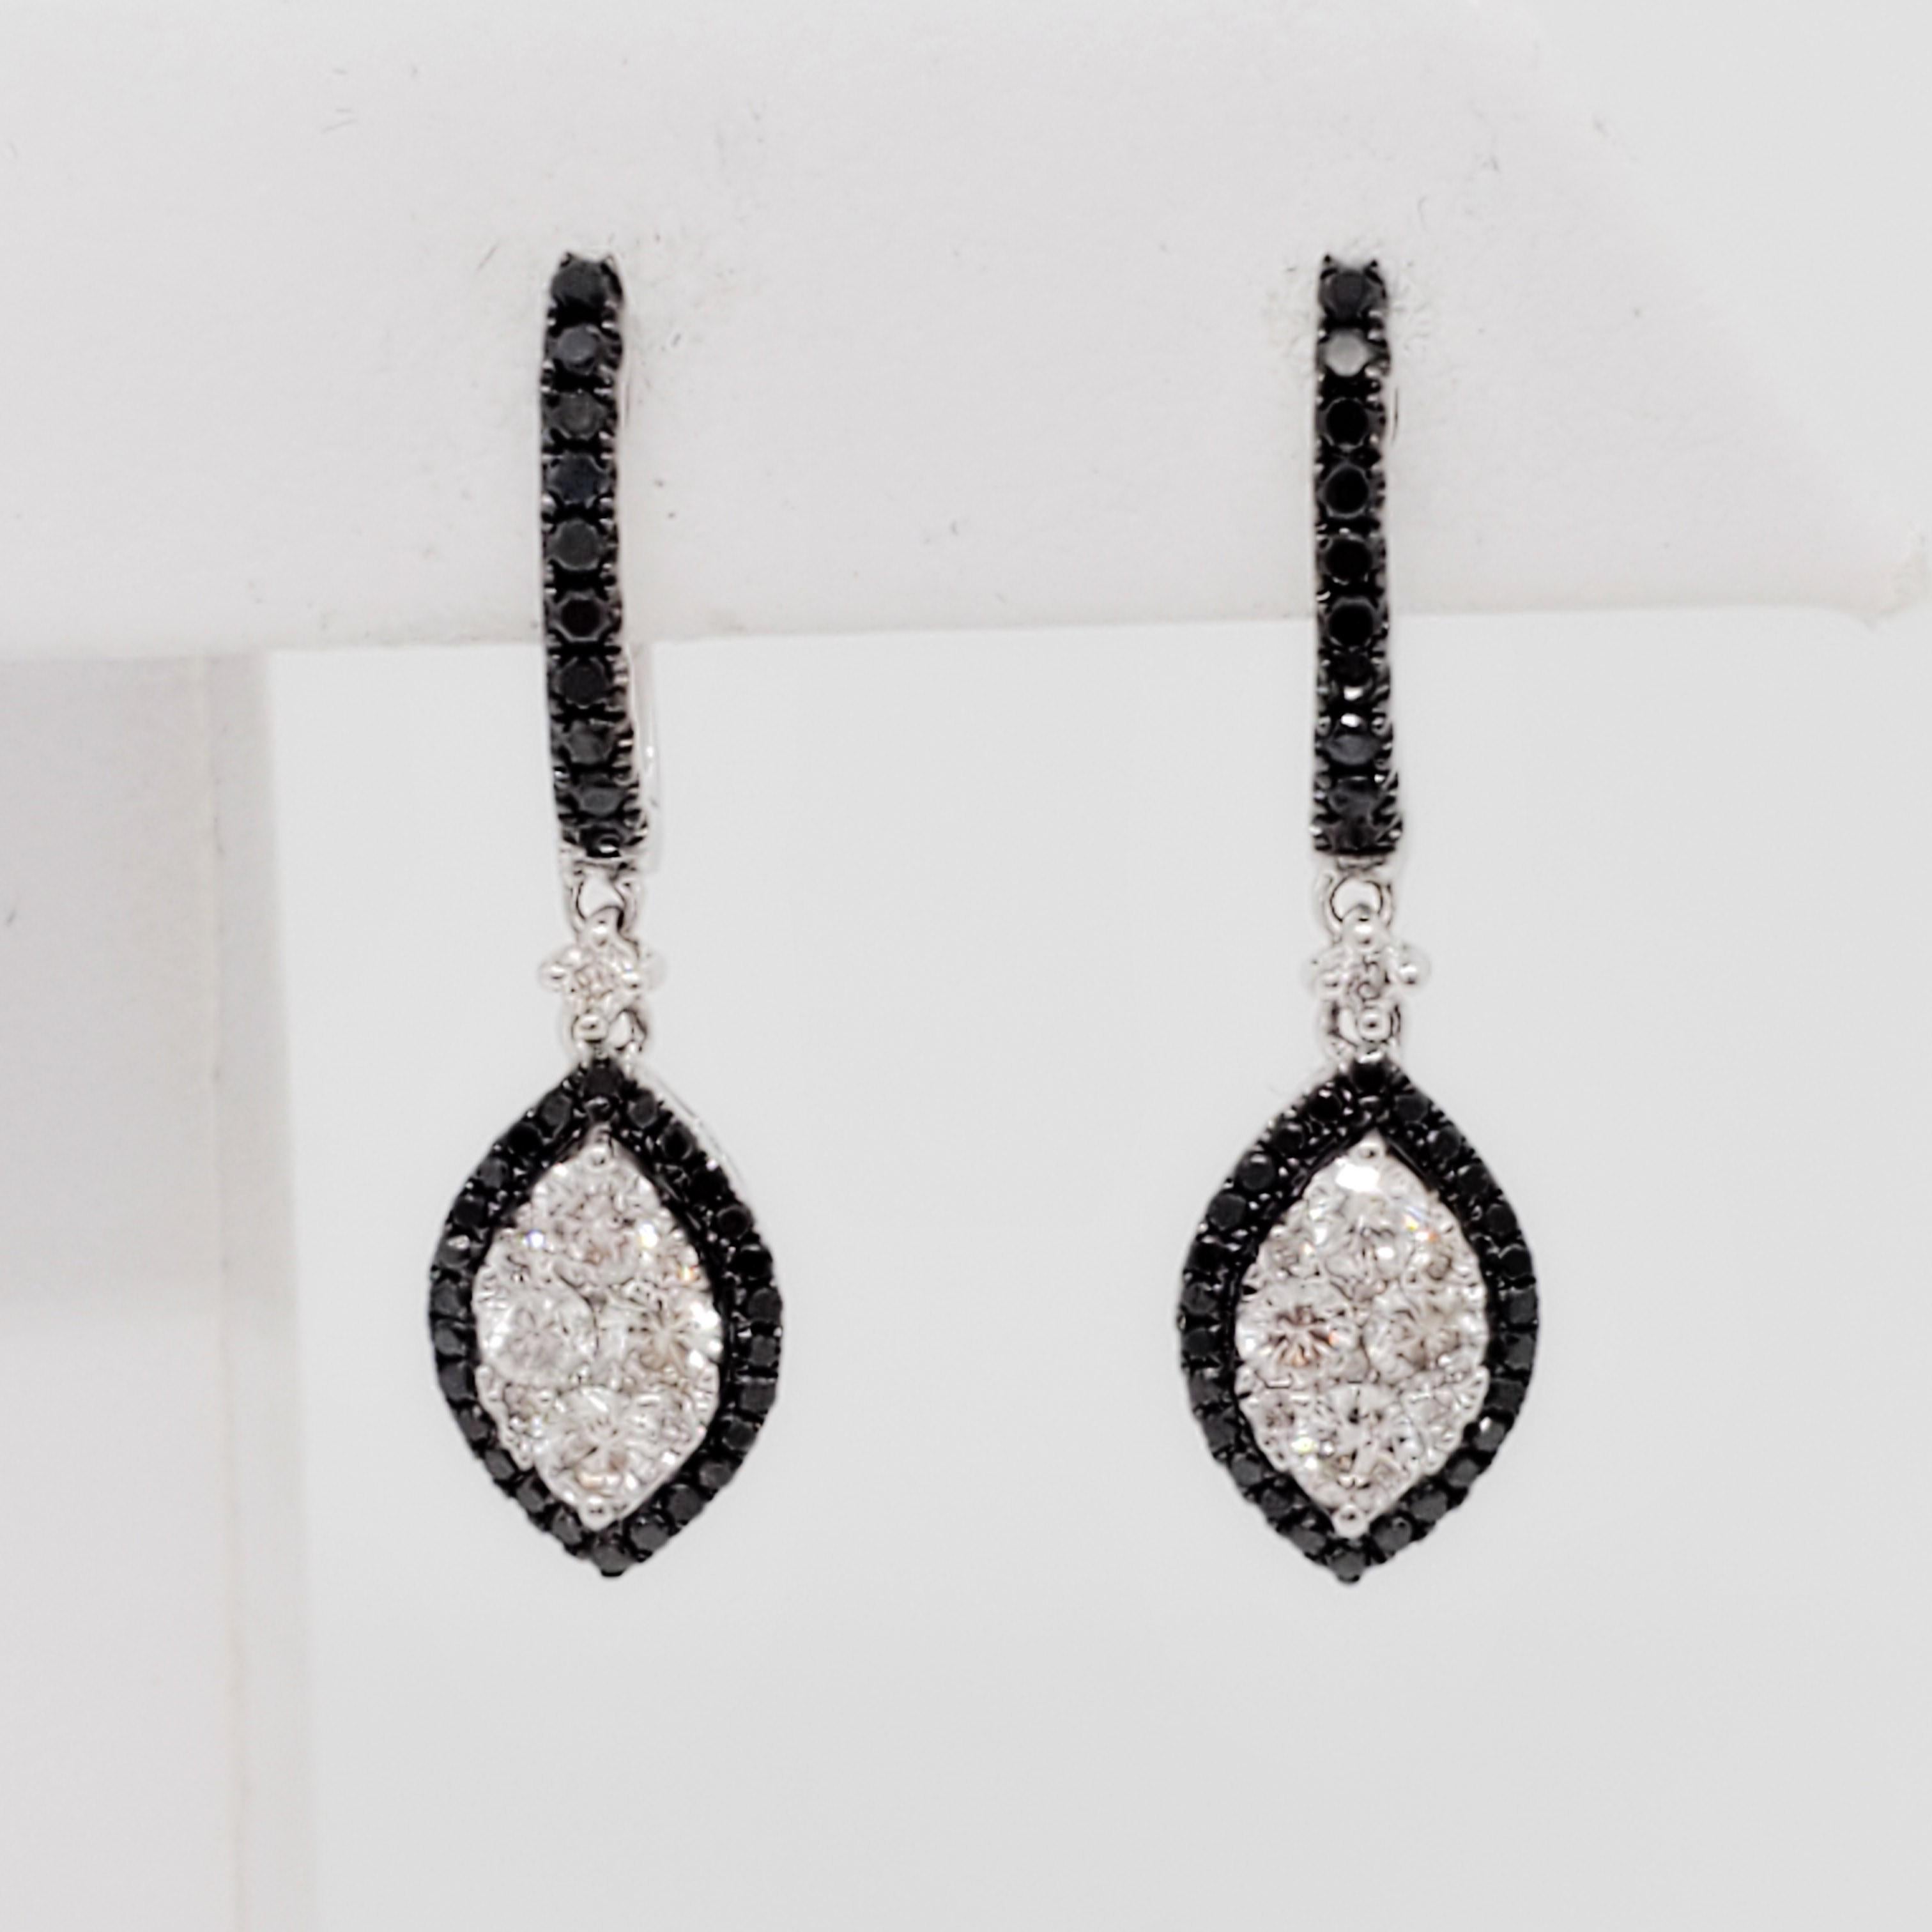 Gorgeous drop earrings with 0.93 ct. of white and black diamond rounds.  Handmade 14k white gold mountings.